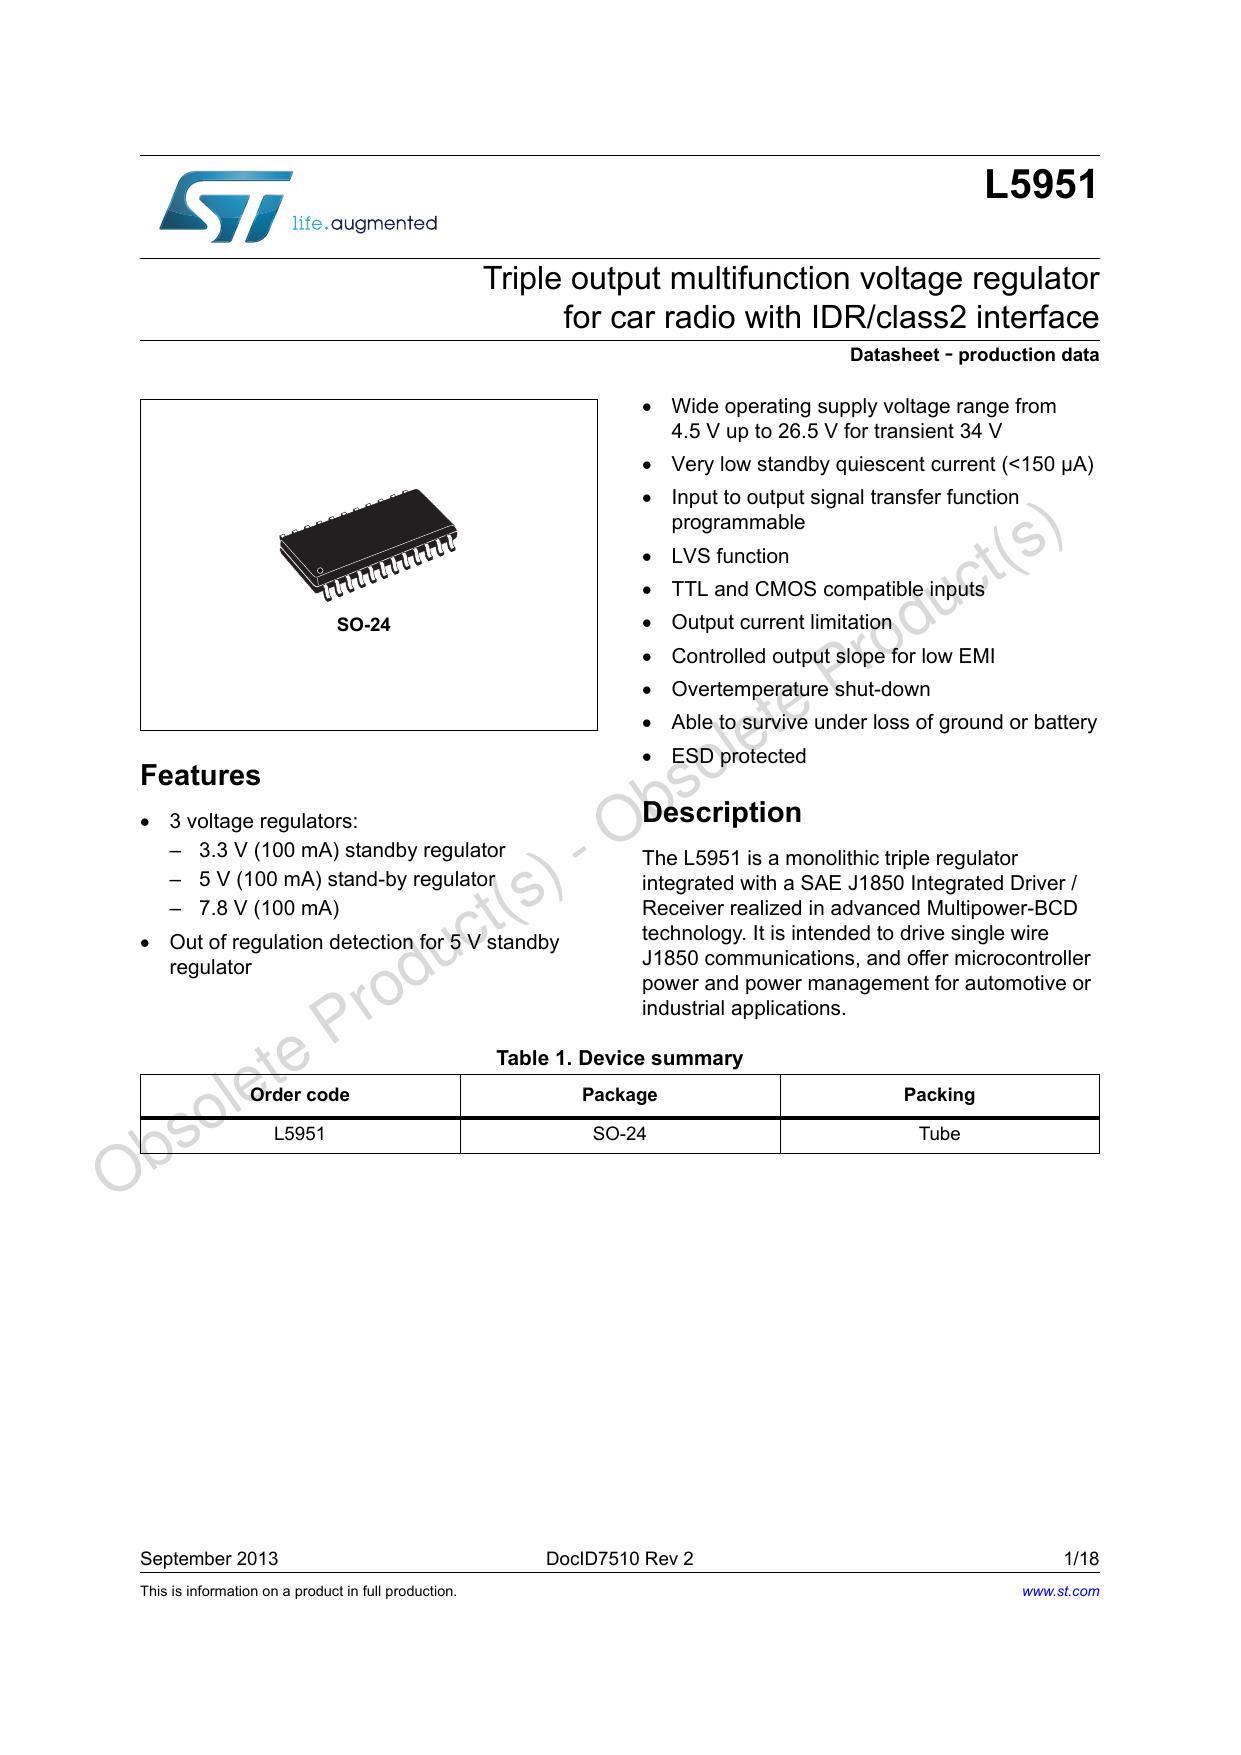 l5951-triple-output-multifunction-voltage-regulator-for-car-radio-with-idriclass2-interface.pdf